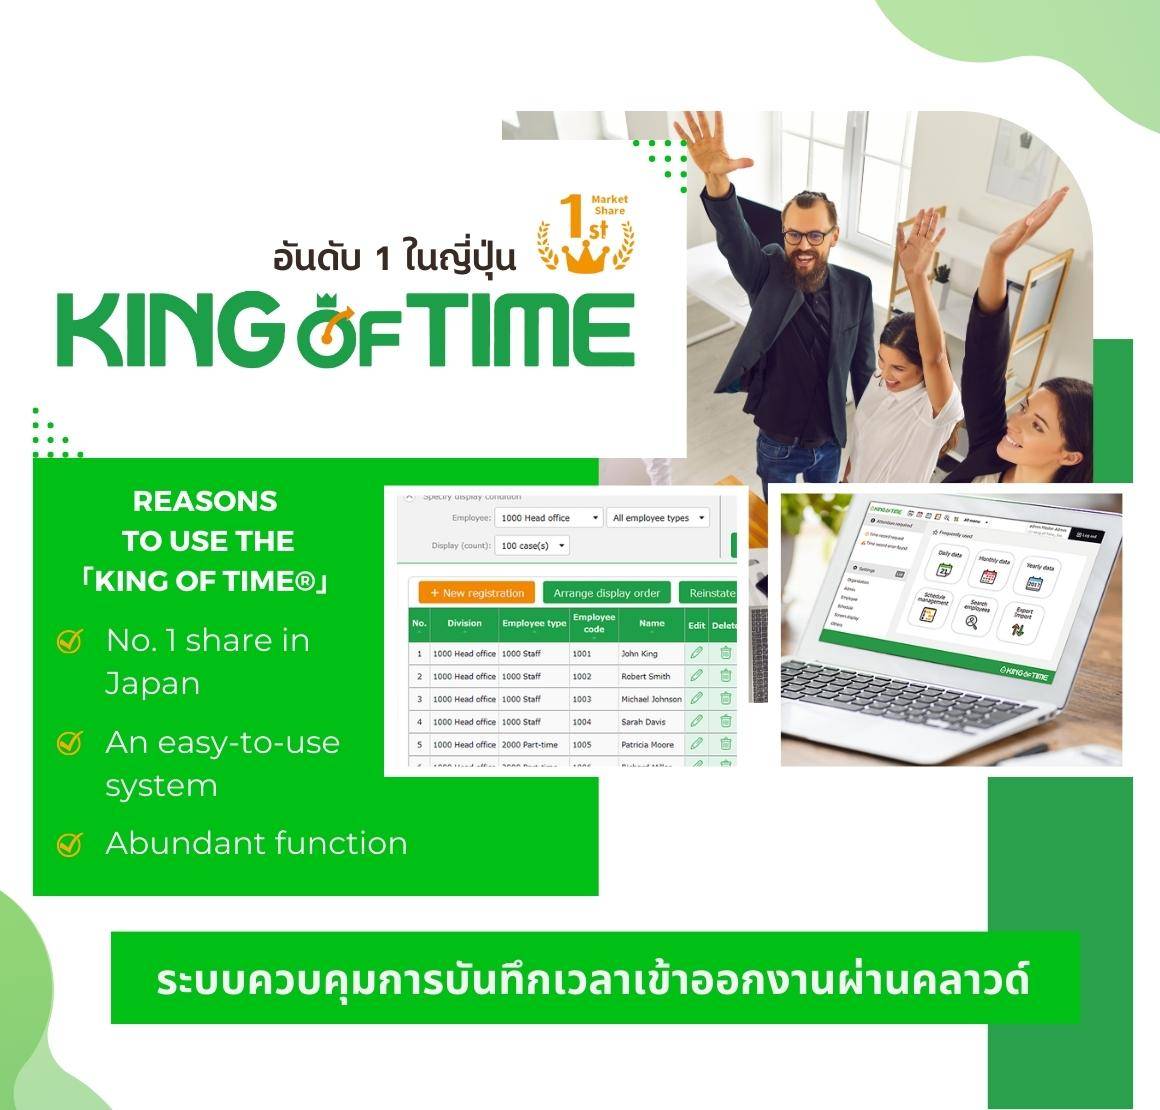 king-of-time-category-it-review